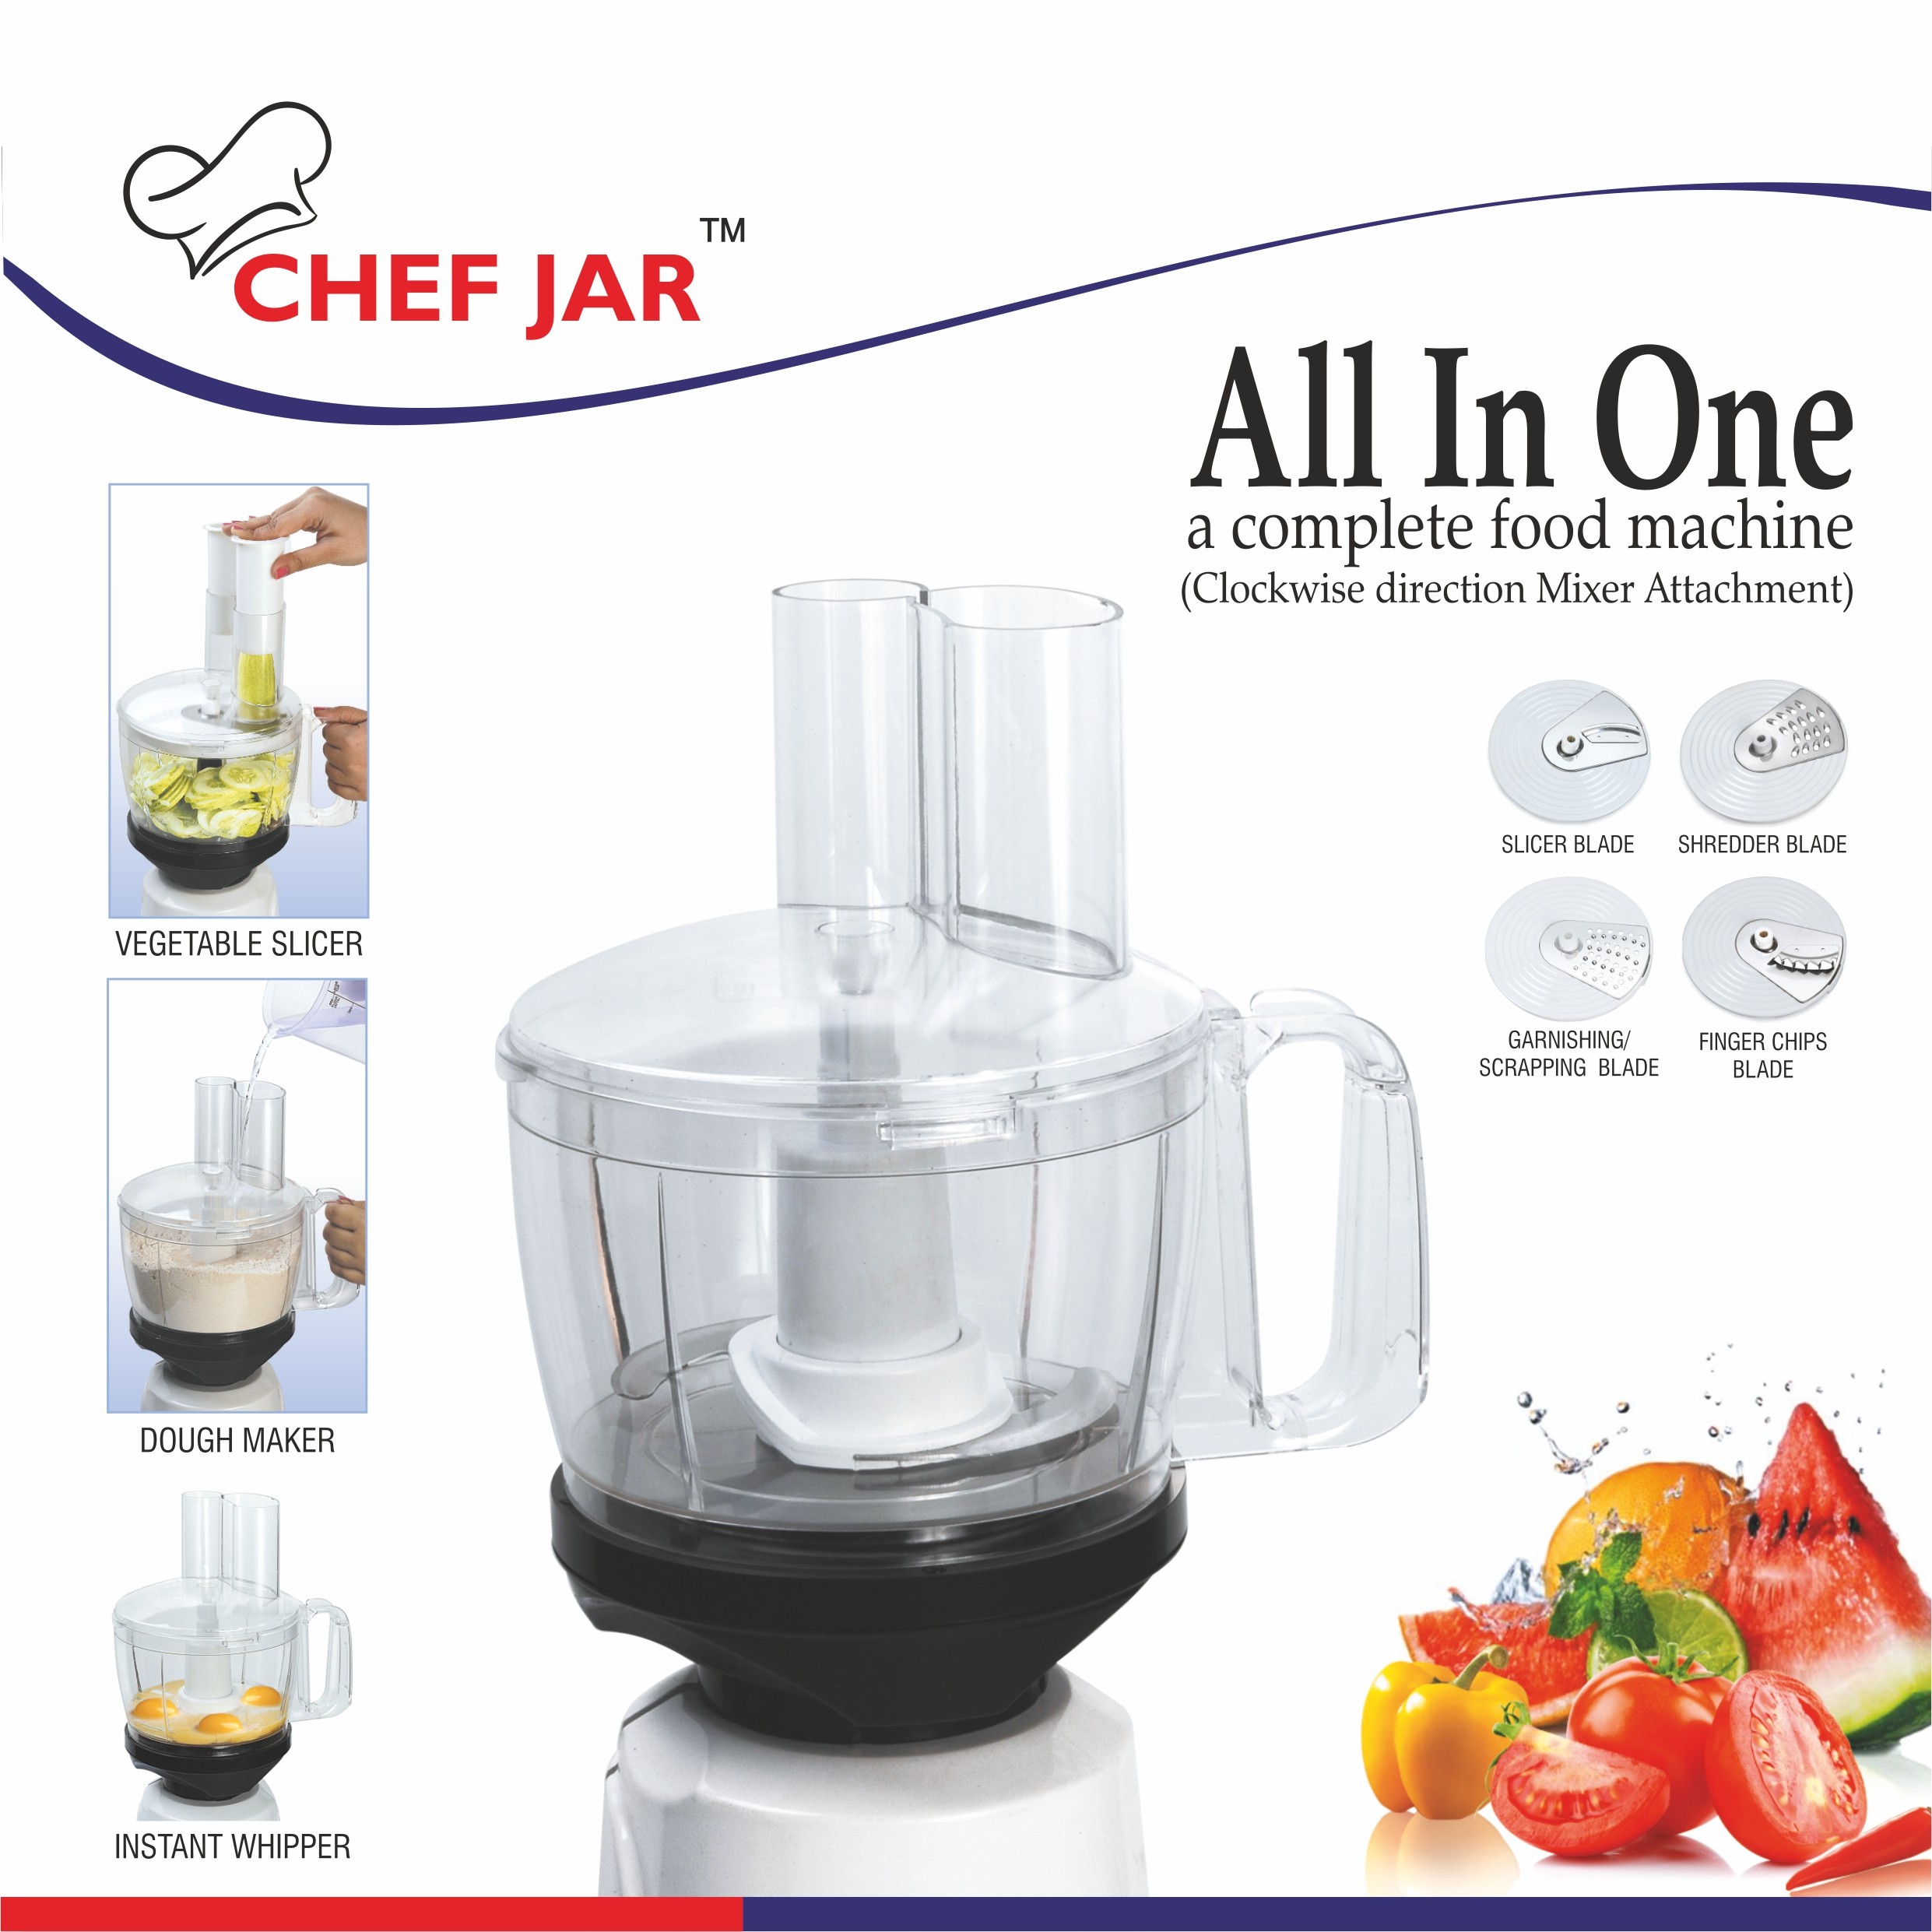 chef-jar-all-in-one-a-complete-food-processor-attachment-for-most-indian-mixer-grinders-compatible-with-all-preethi-premier-models-except-preethi-steele4